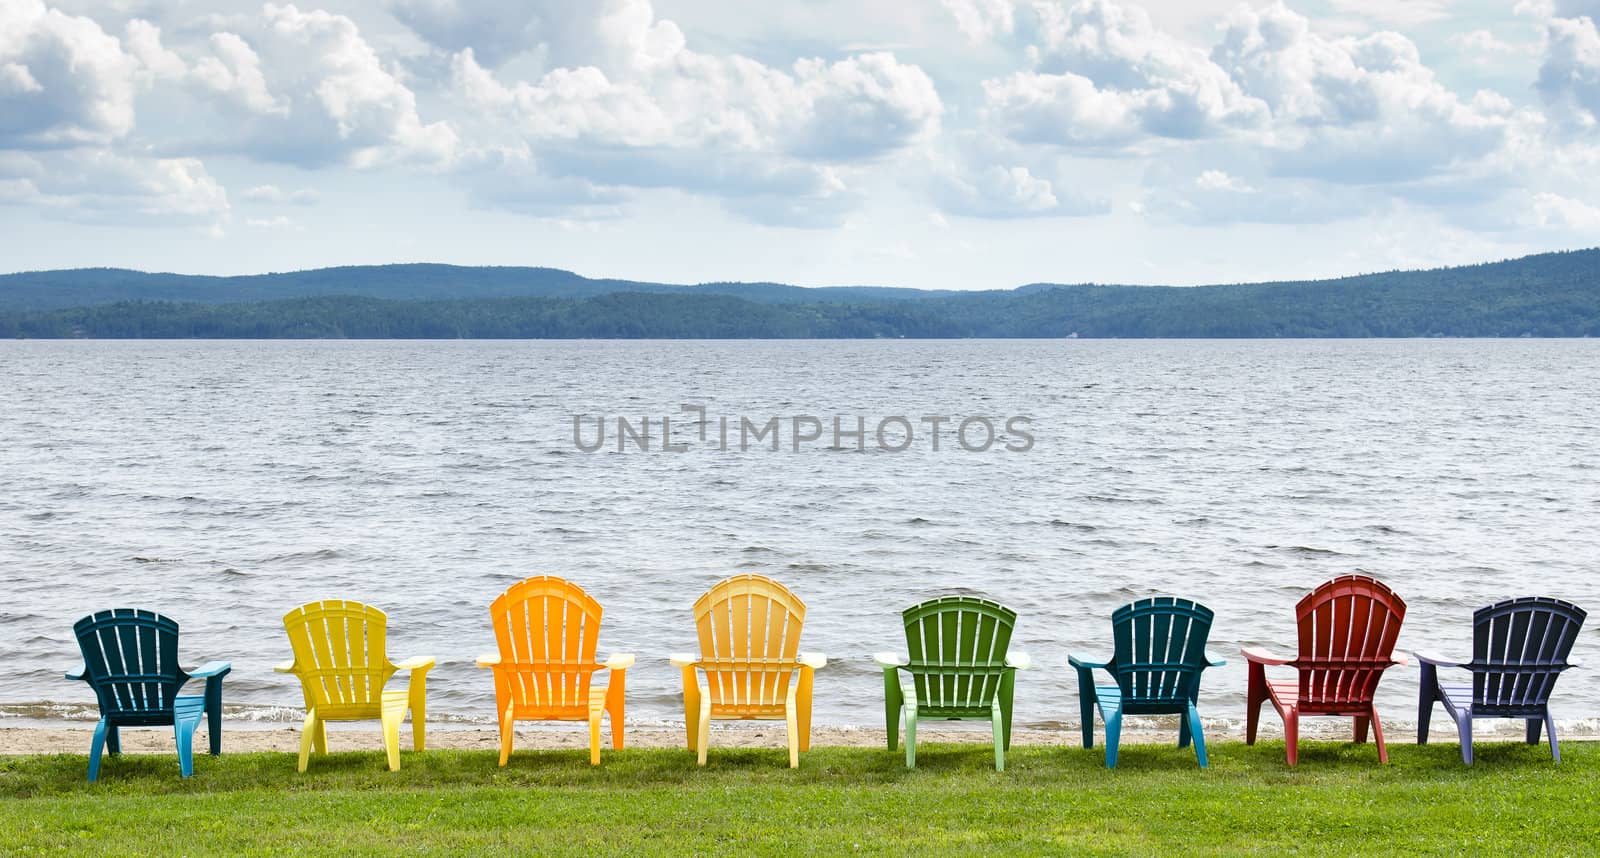 Eight colorful Adirondack chairs lined up on the beach looking out on the lake, mountains and clouds.